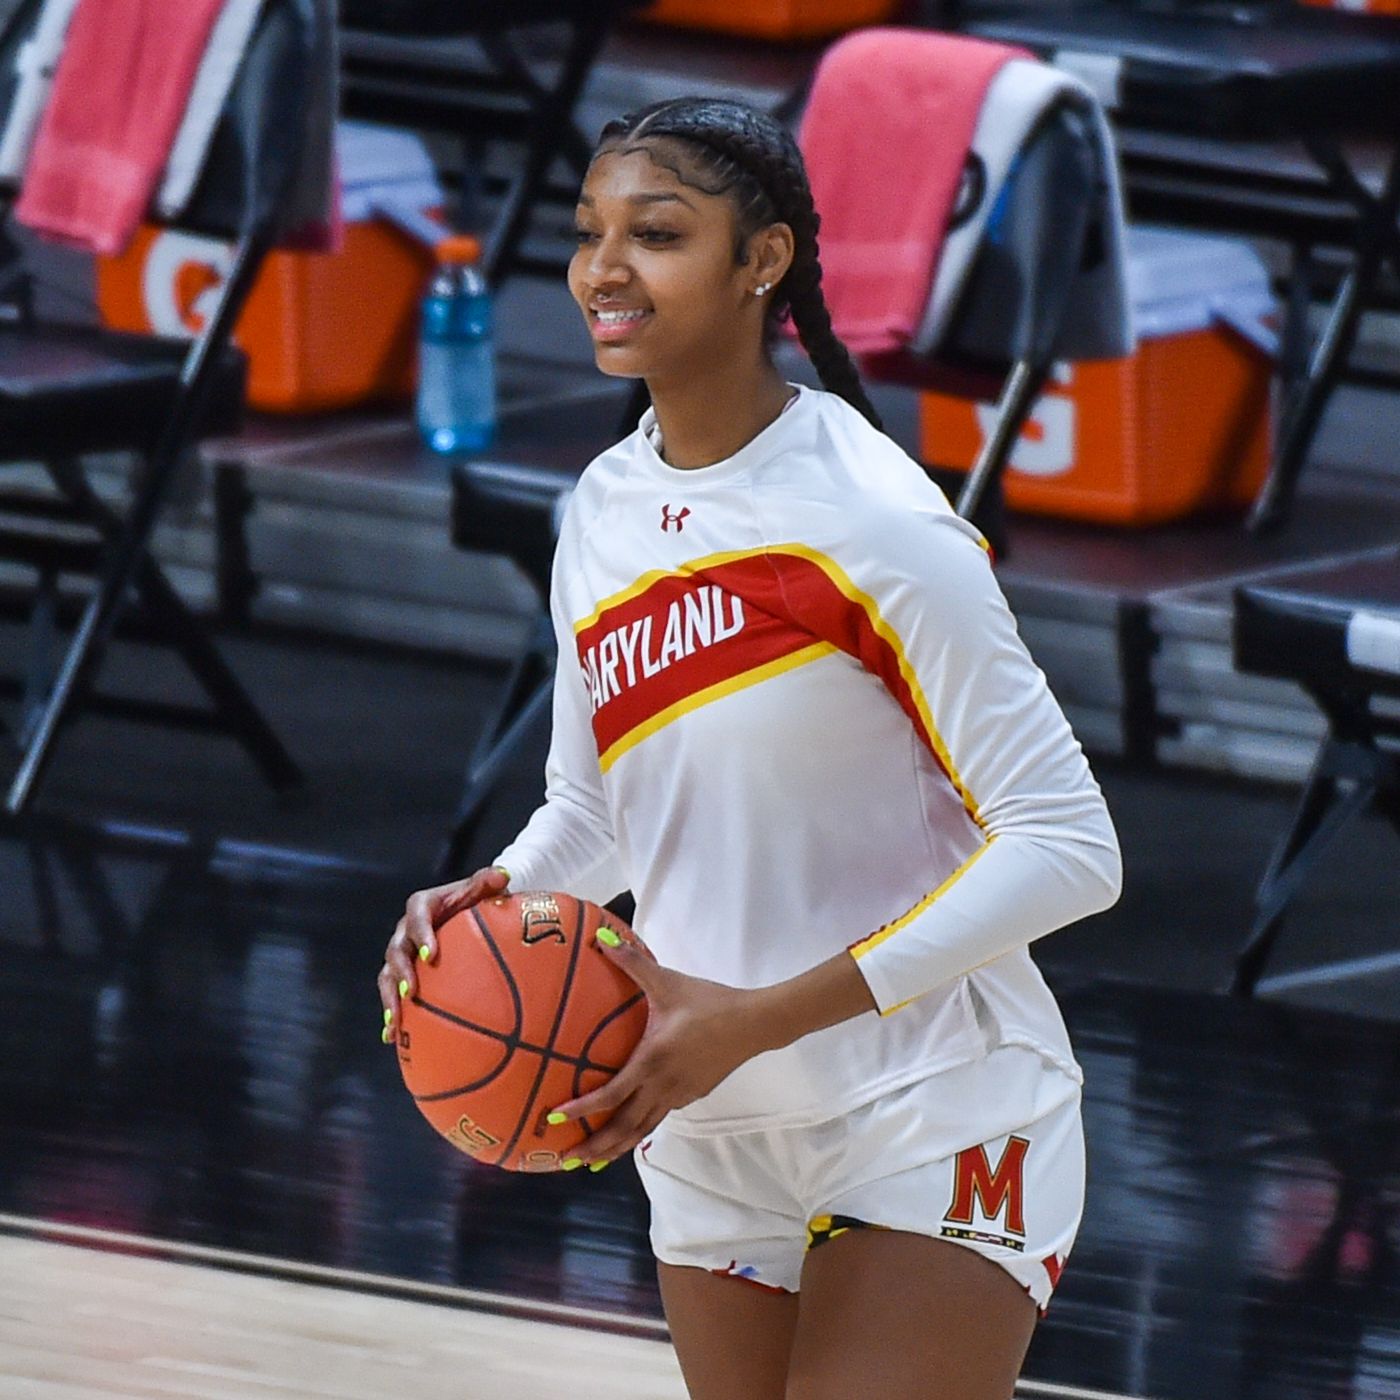 MM 5.6: Maryland women's basketball forward Angel Reese to attend USA Basketball U19 World Cup Team trials